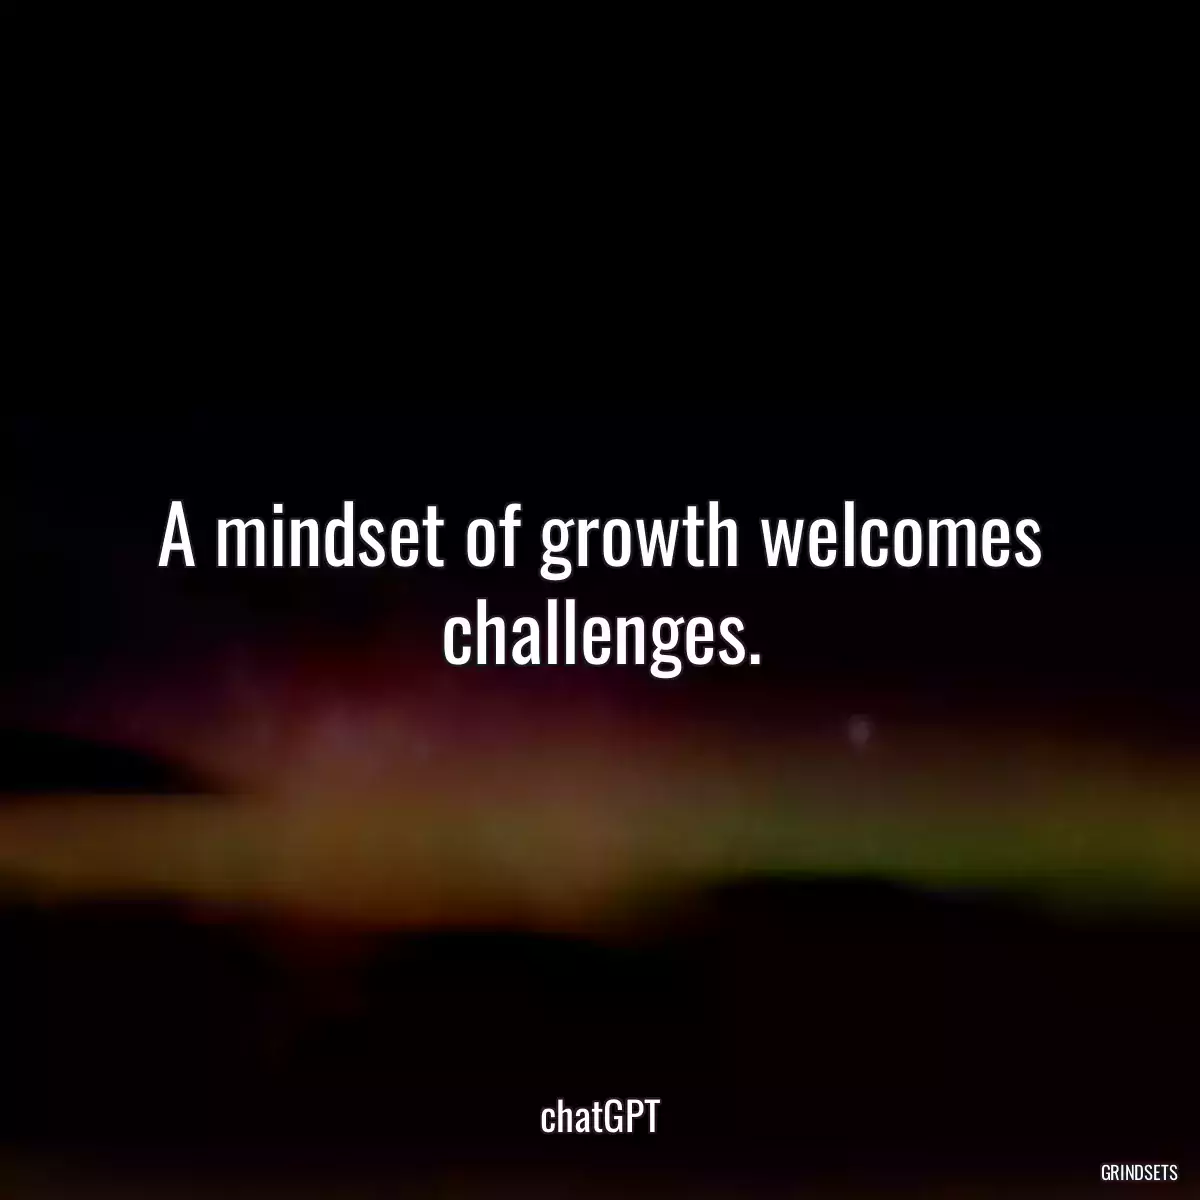 A mindset of growth welcomes challenges.